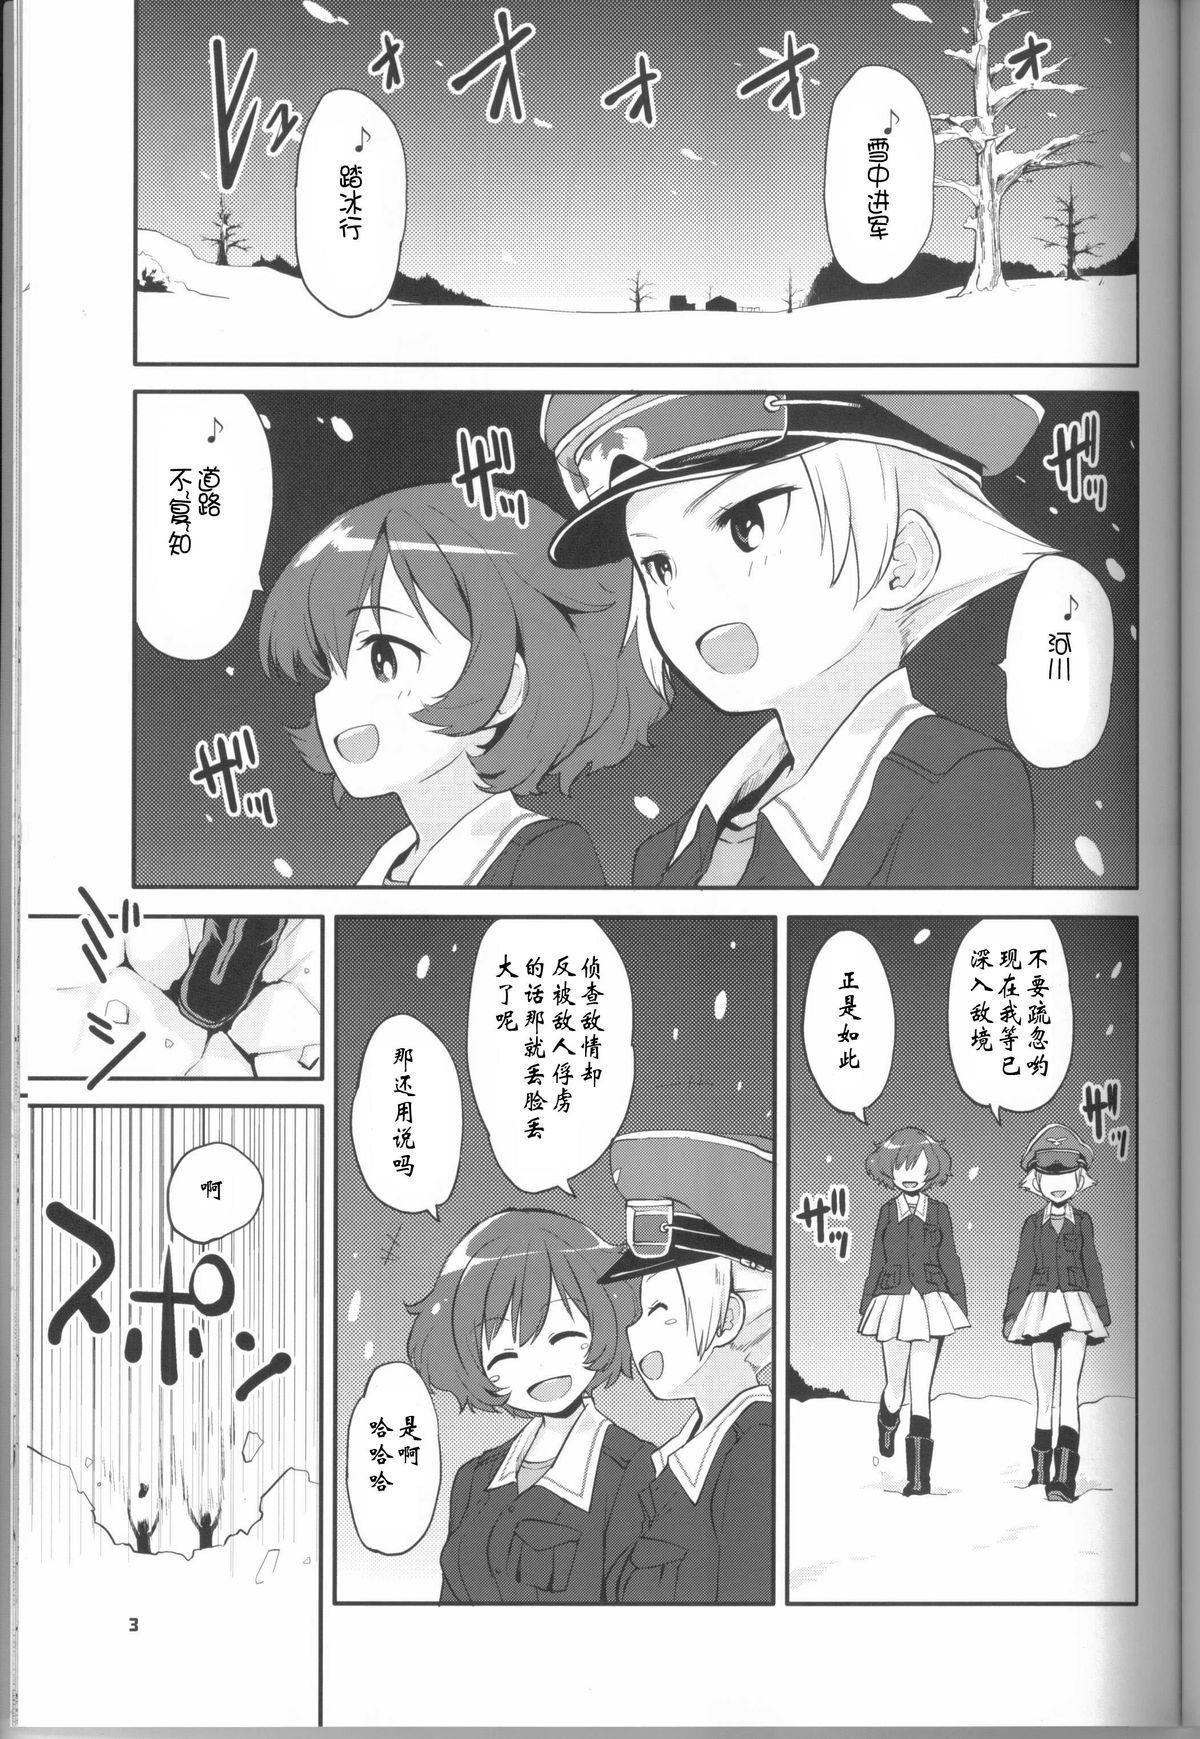 Van The General Frost Has Come! - Girls und panzer Best Blowjob - Page 2